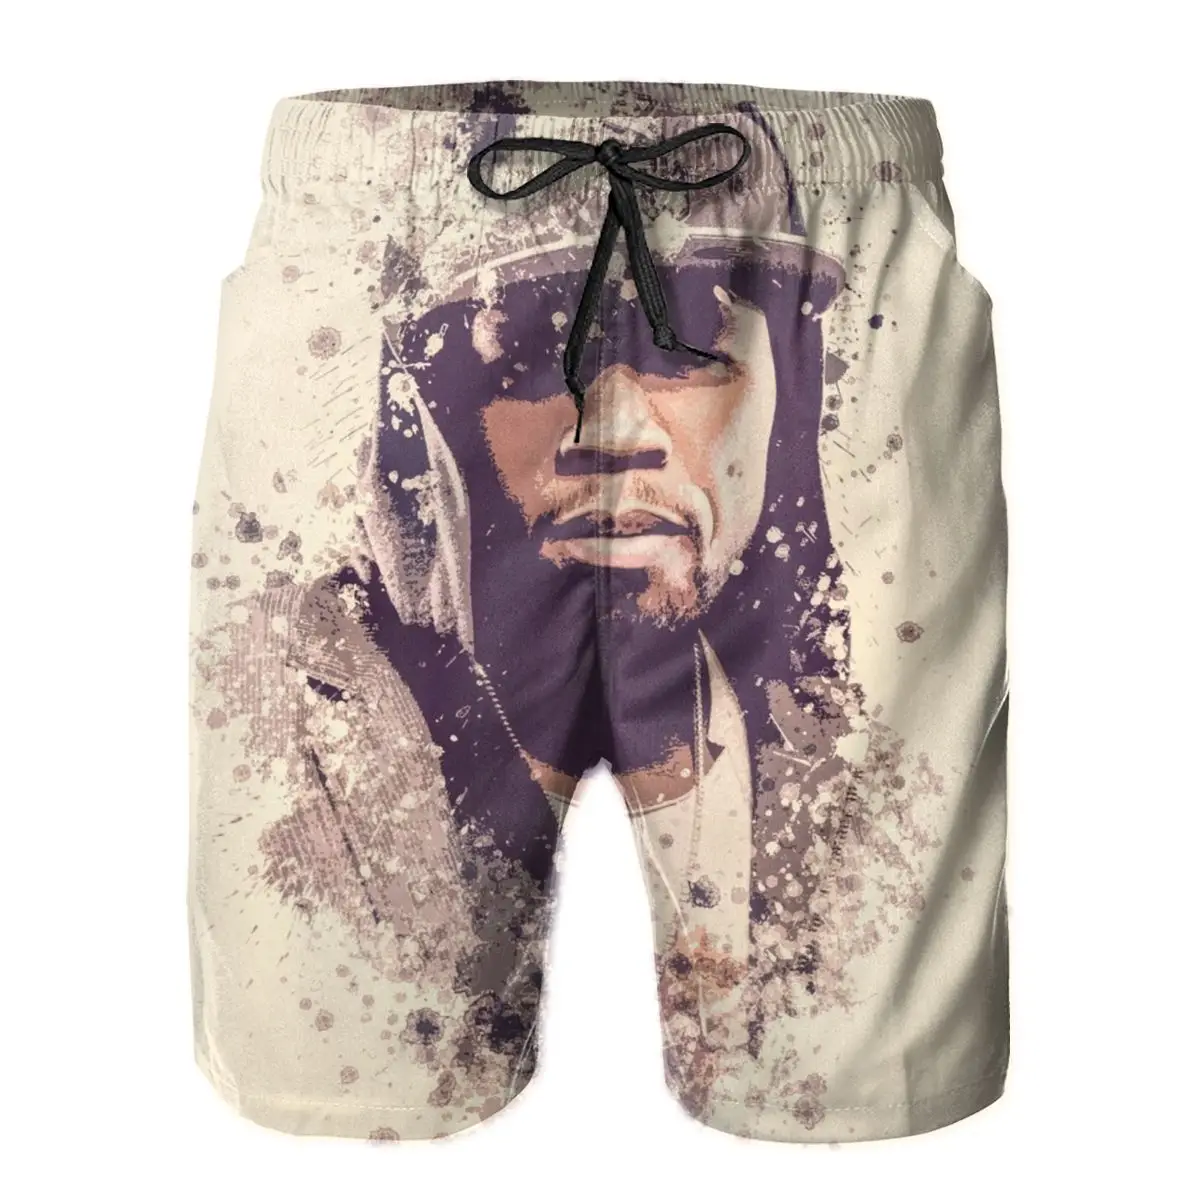 

Mens Pants 50 Cent Splatter Painting Beach Board Swim Trunks Sport Quick Dry Mesh Casual Pretty Casual club Short for Adult